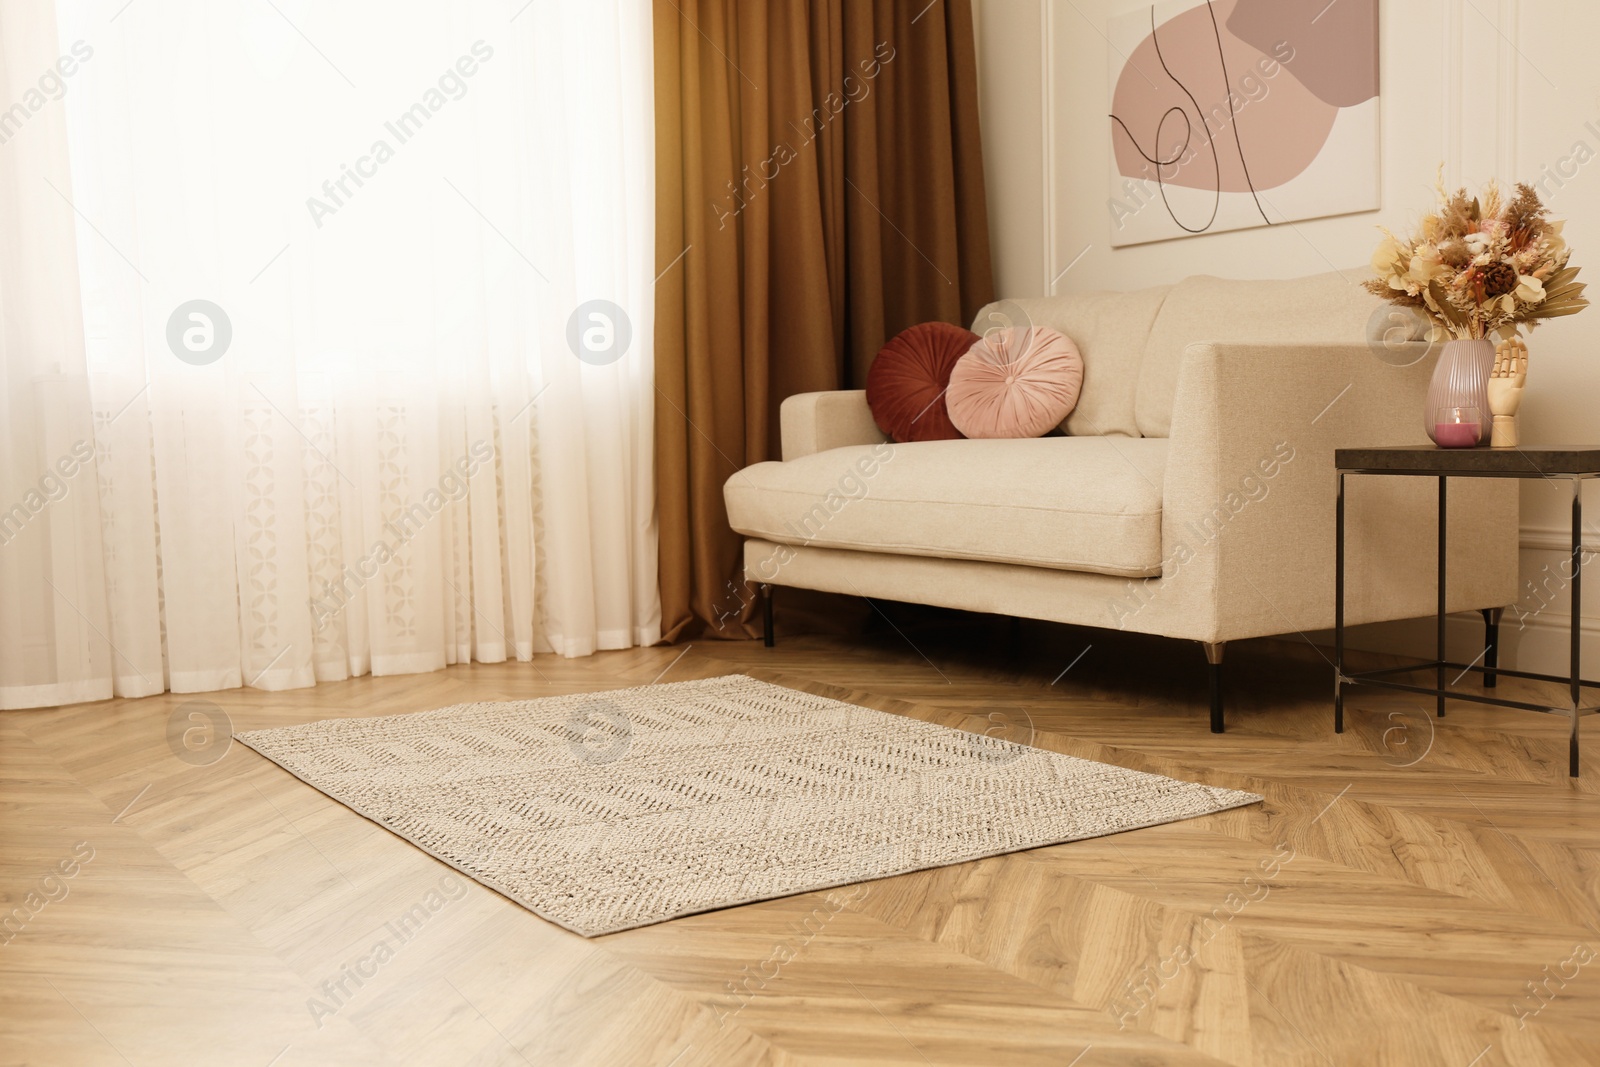 Photo of Living room interior with stylish furniture and carpet